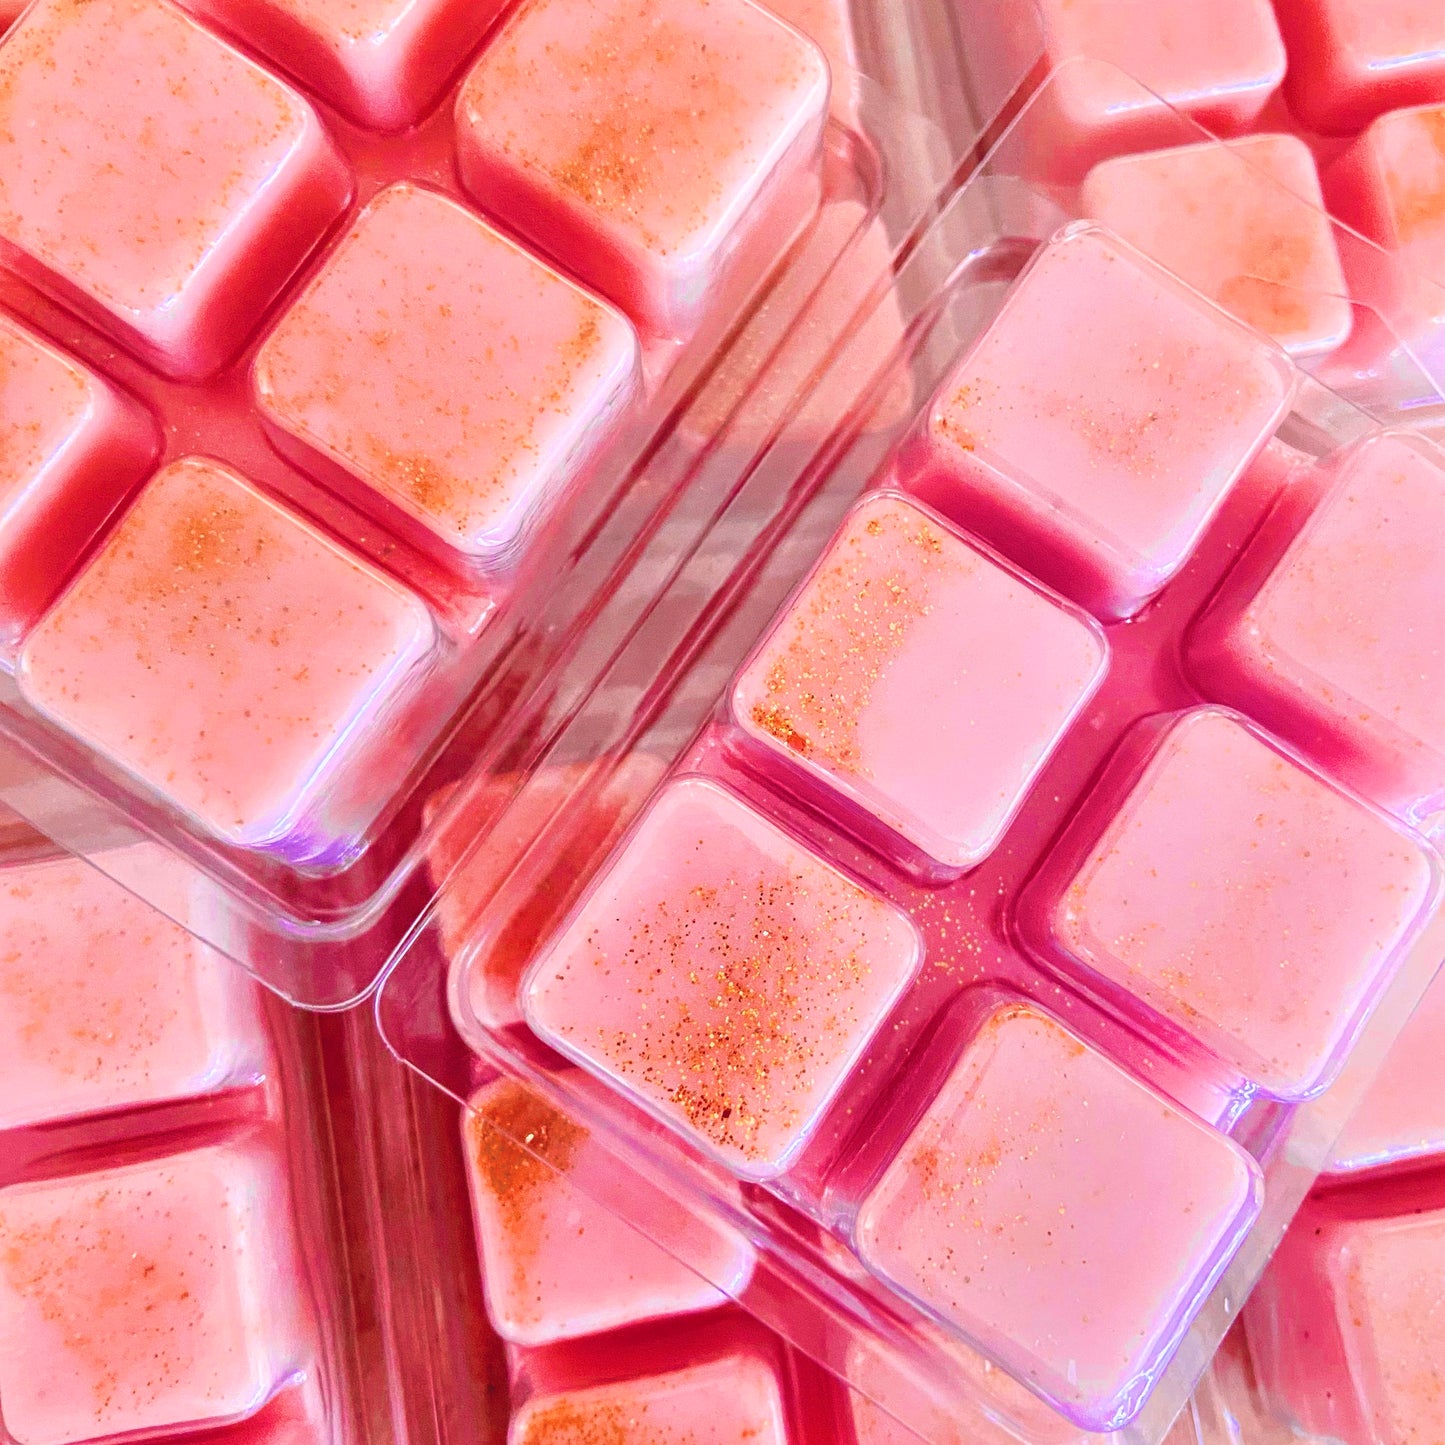 Pink, glittery Opal Fruity Wax Melts in clear plastic packaging by The Soap Gal x.